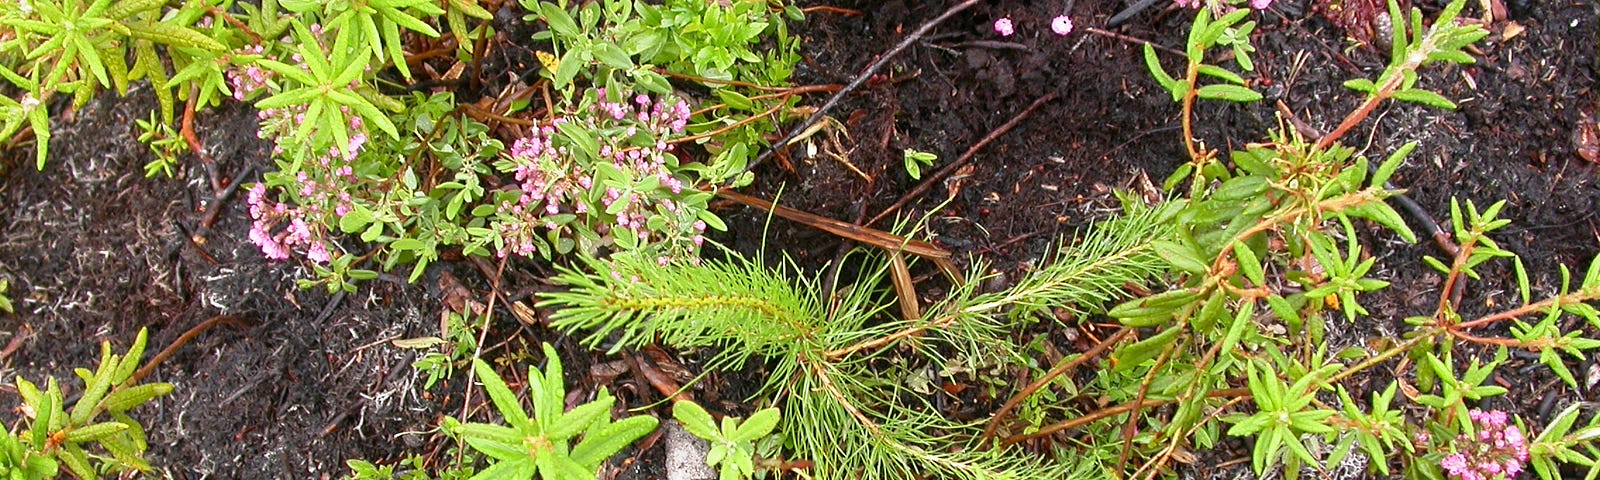 Looking down onto a pine tree seedling planted in the ground